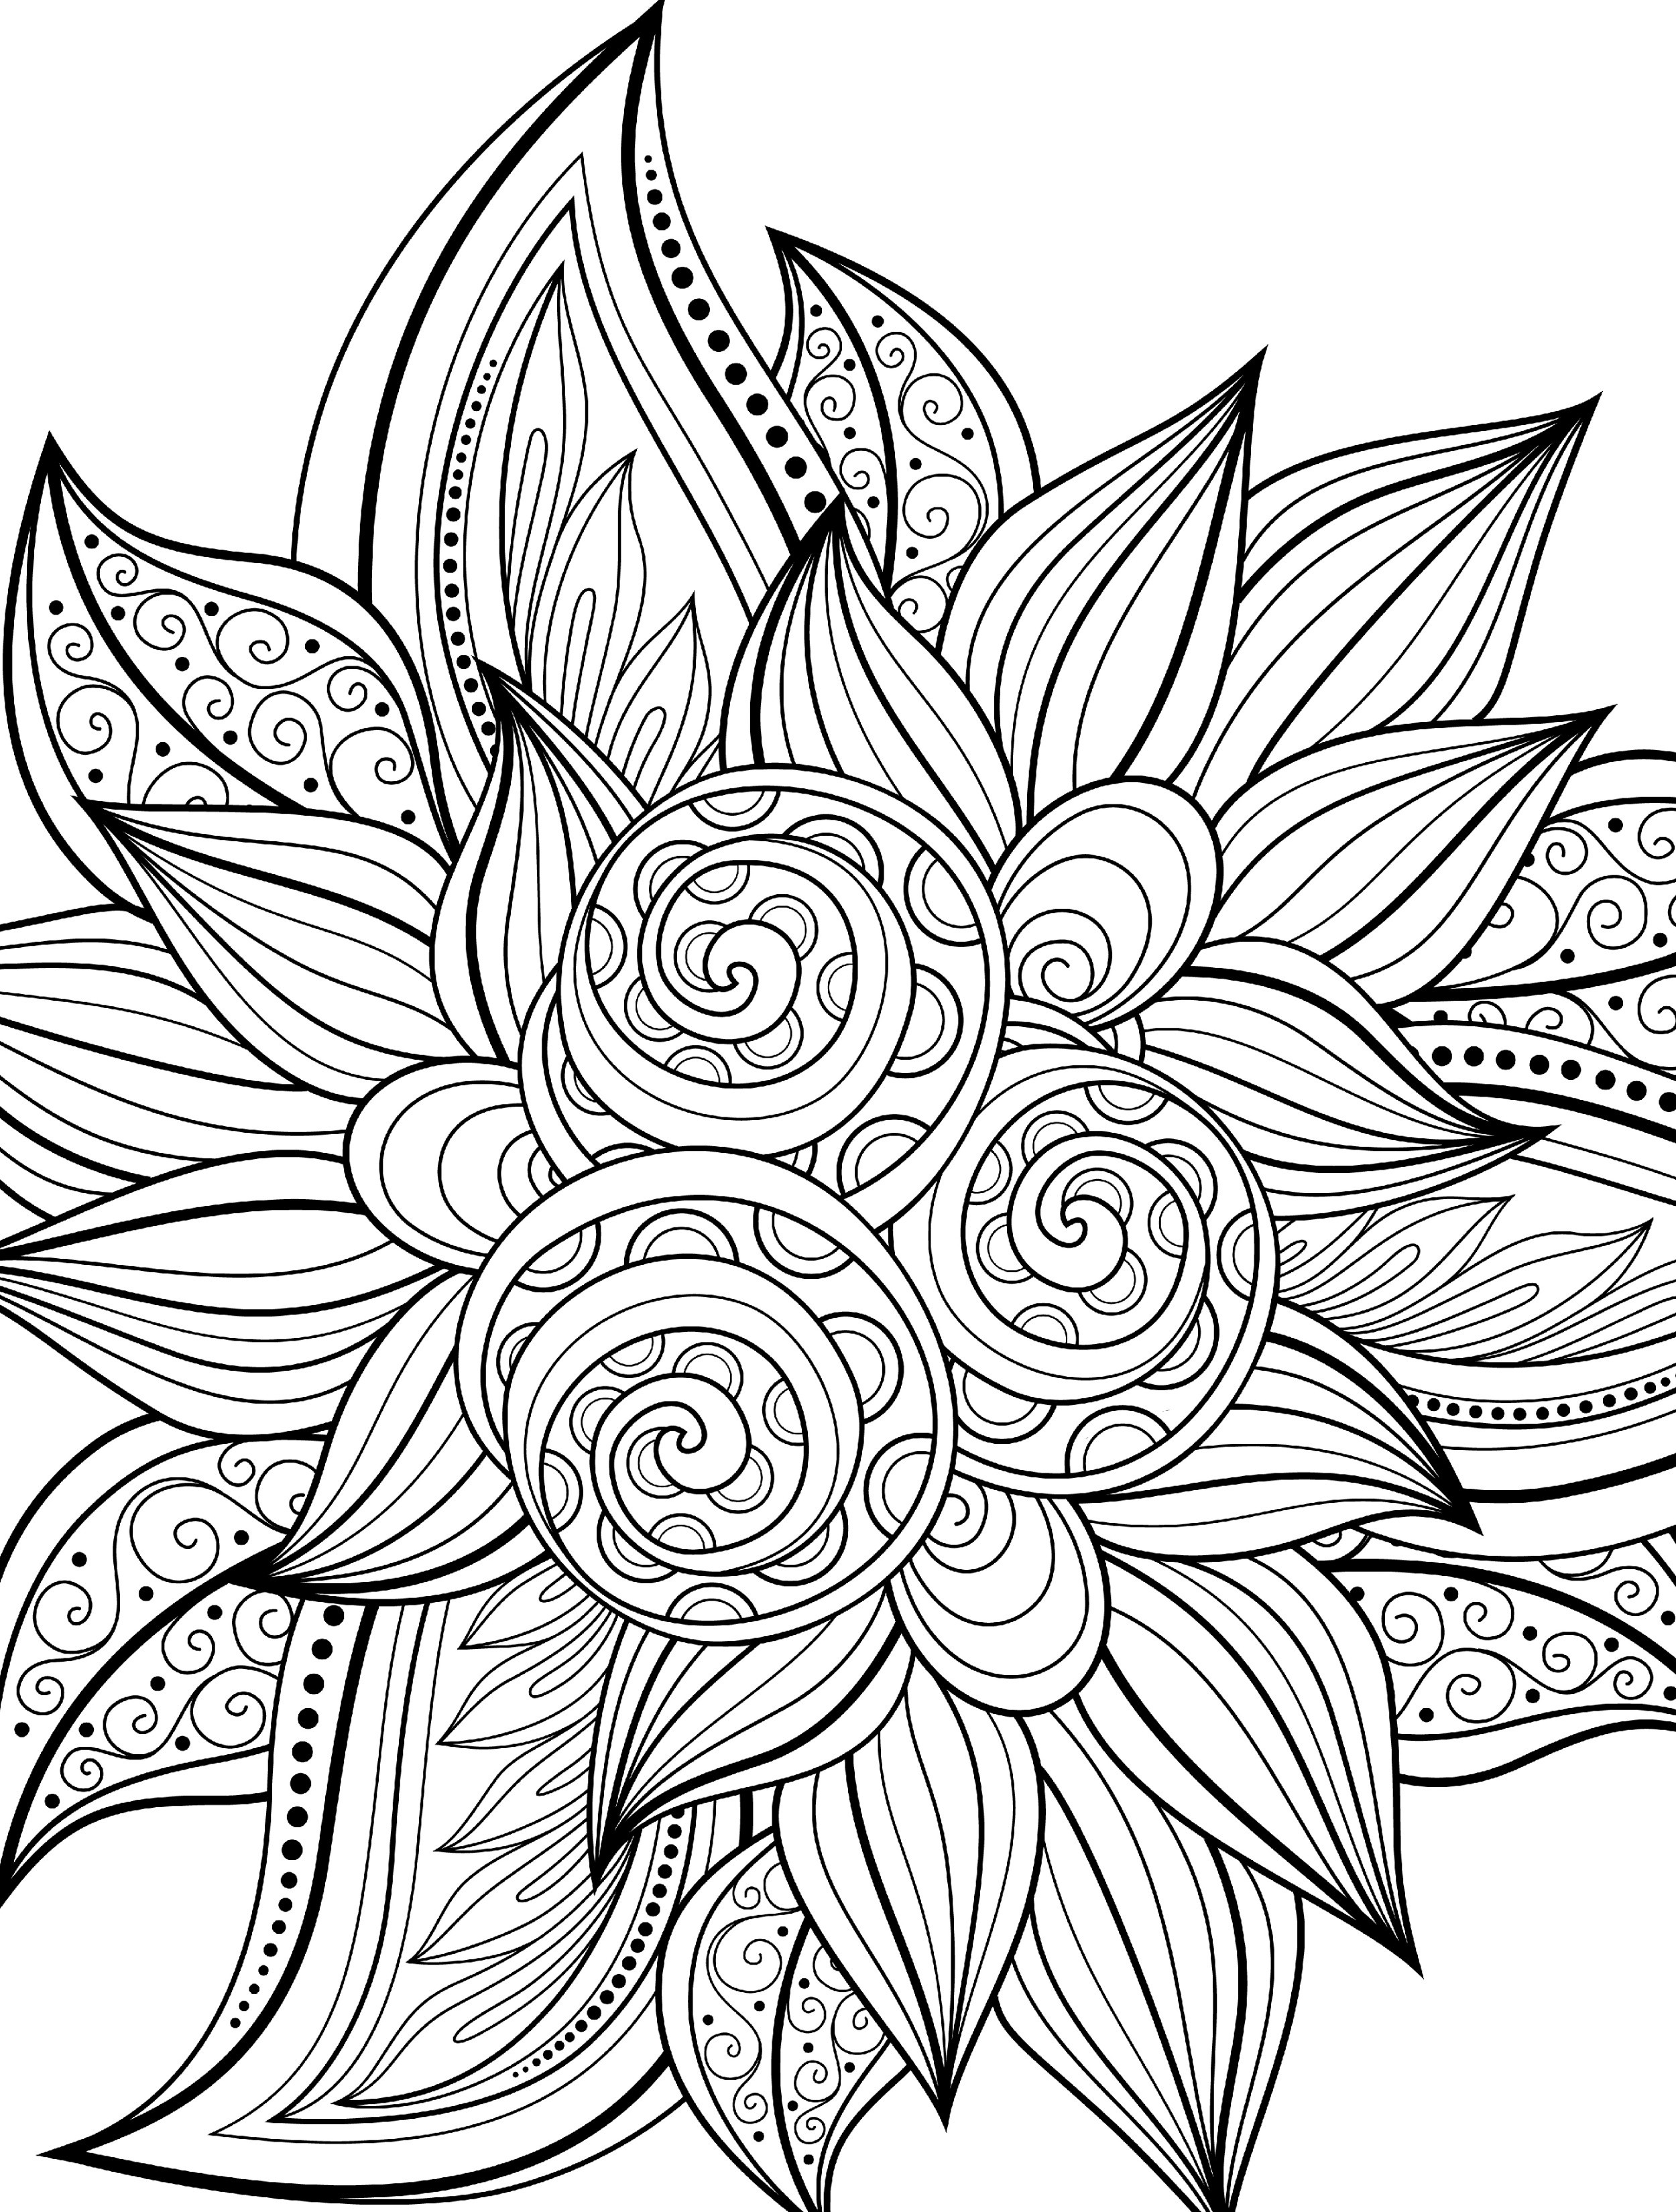 Christmas Girl Coloring Pages For Adults
 10 Free Printable Holiday Adult Coloring Pages